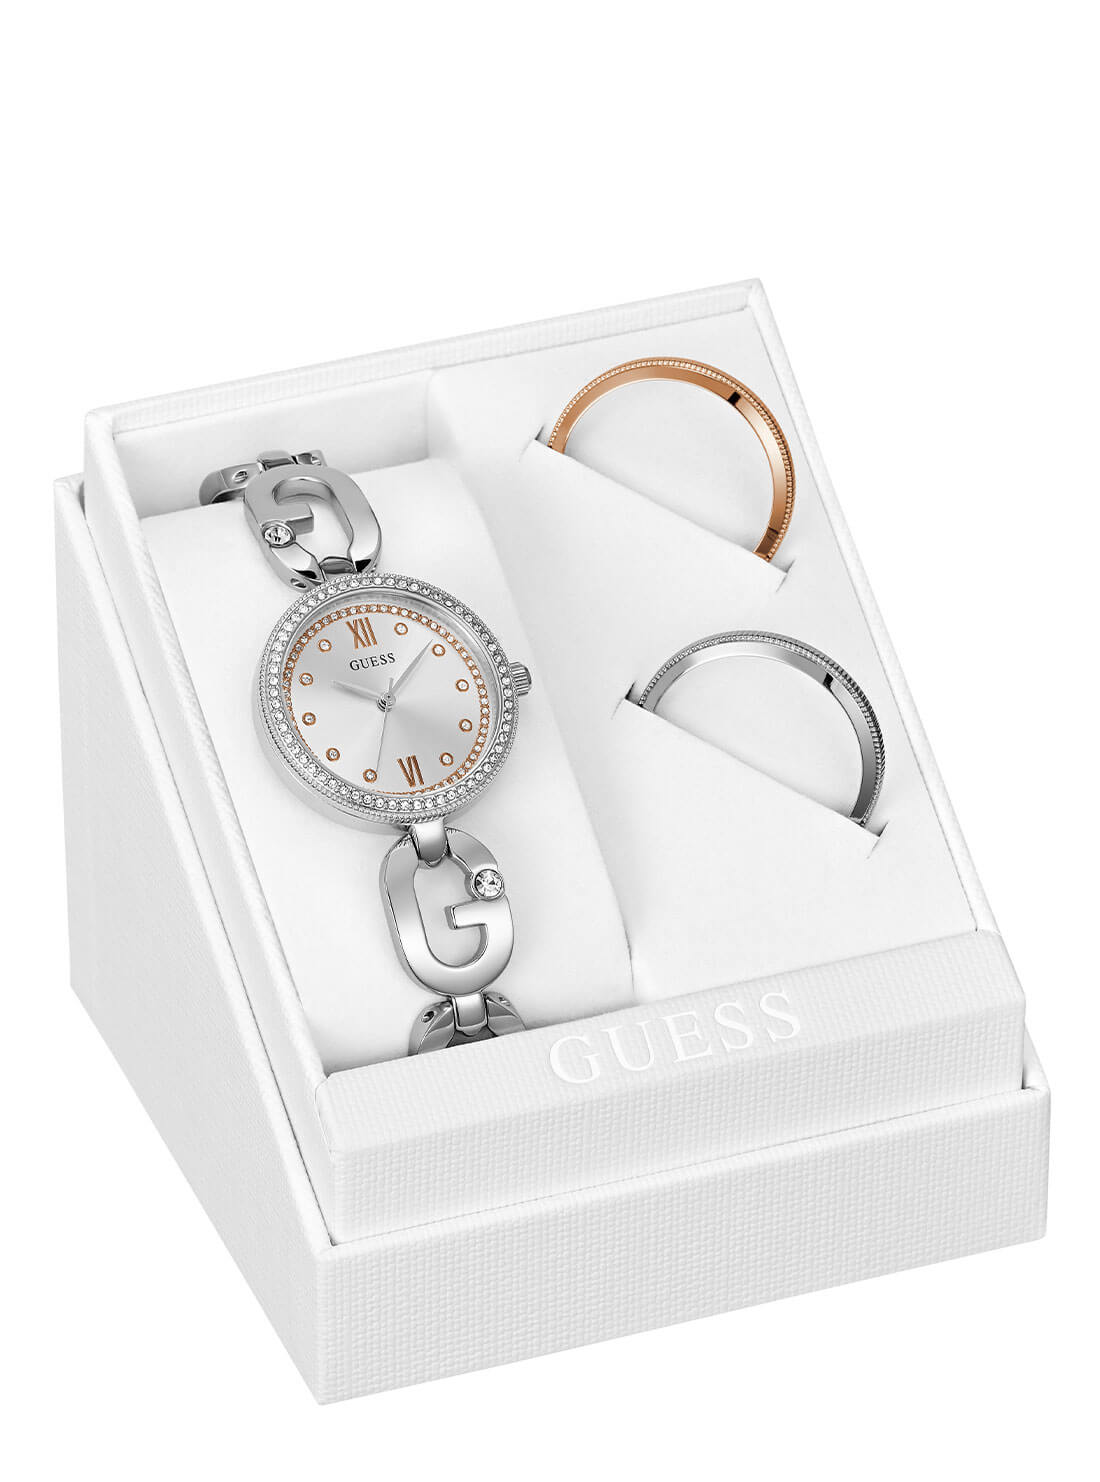 Silver Empower Interchangeable Crystal Link Bracelet Watch | GUESS Women's Watches | giftset view